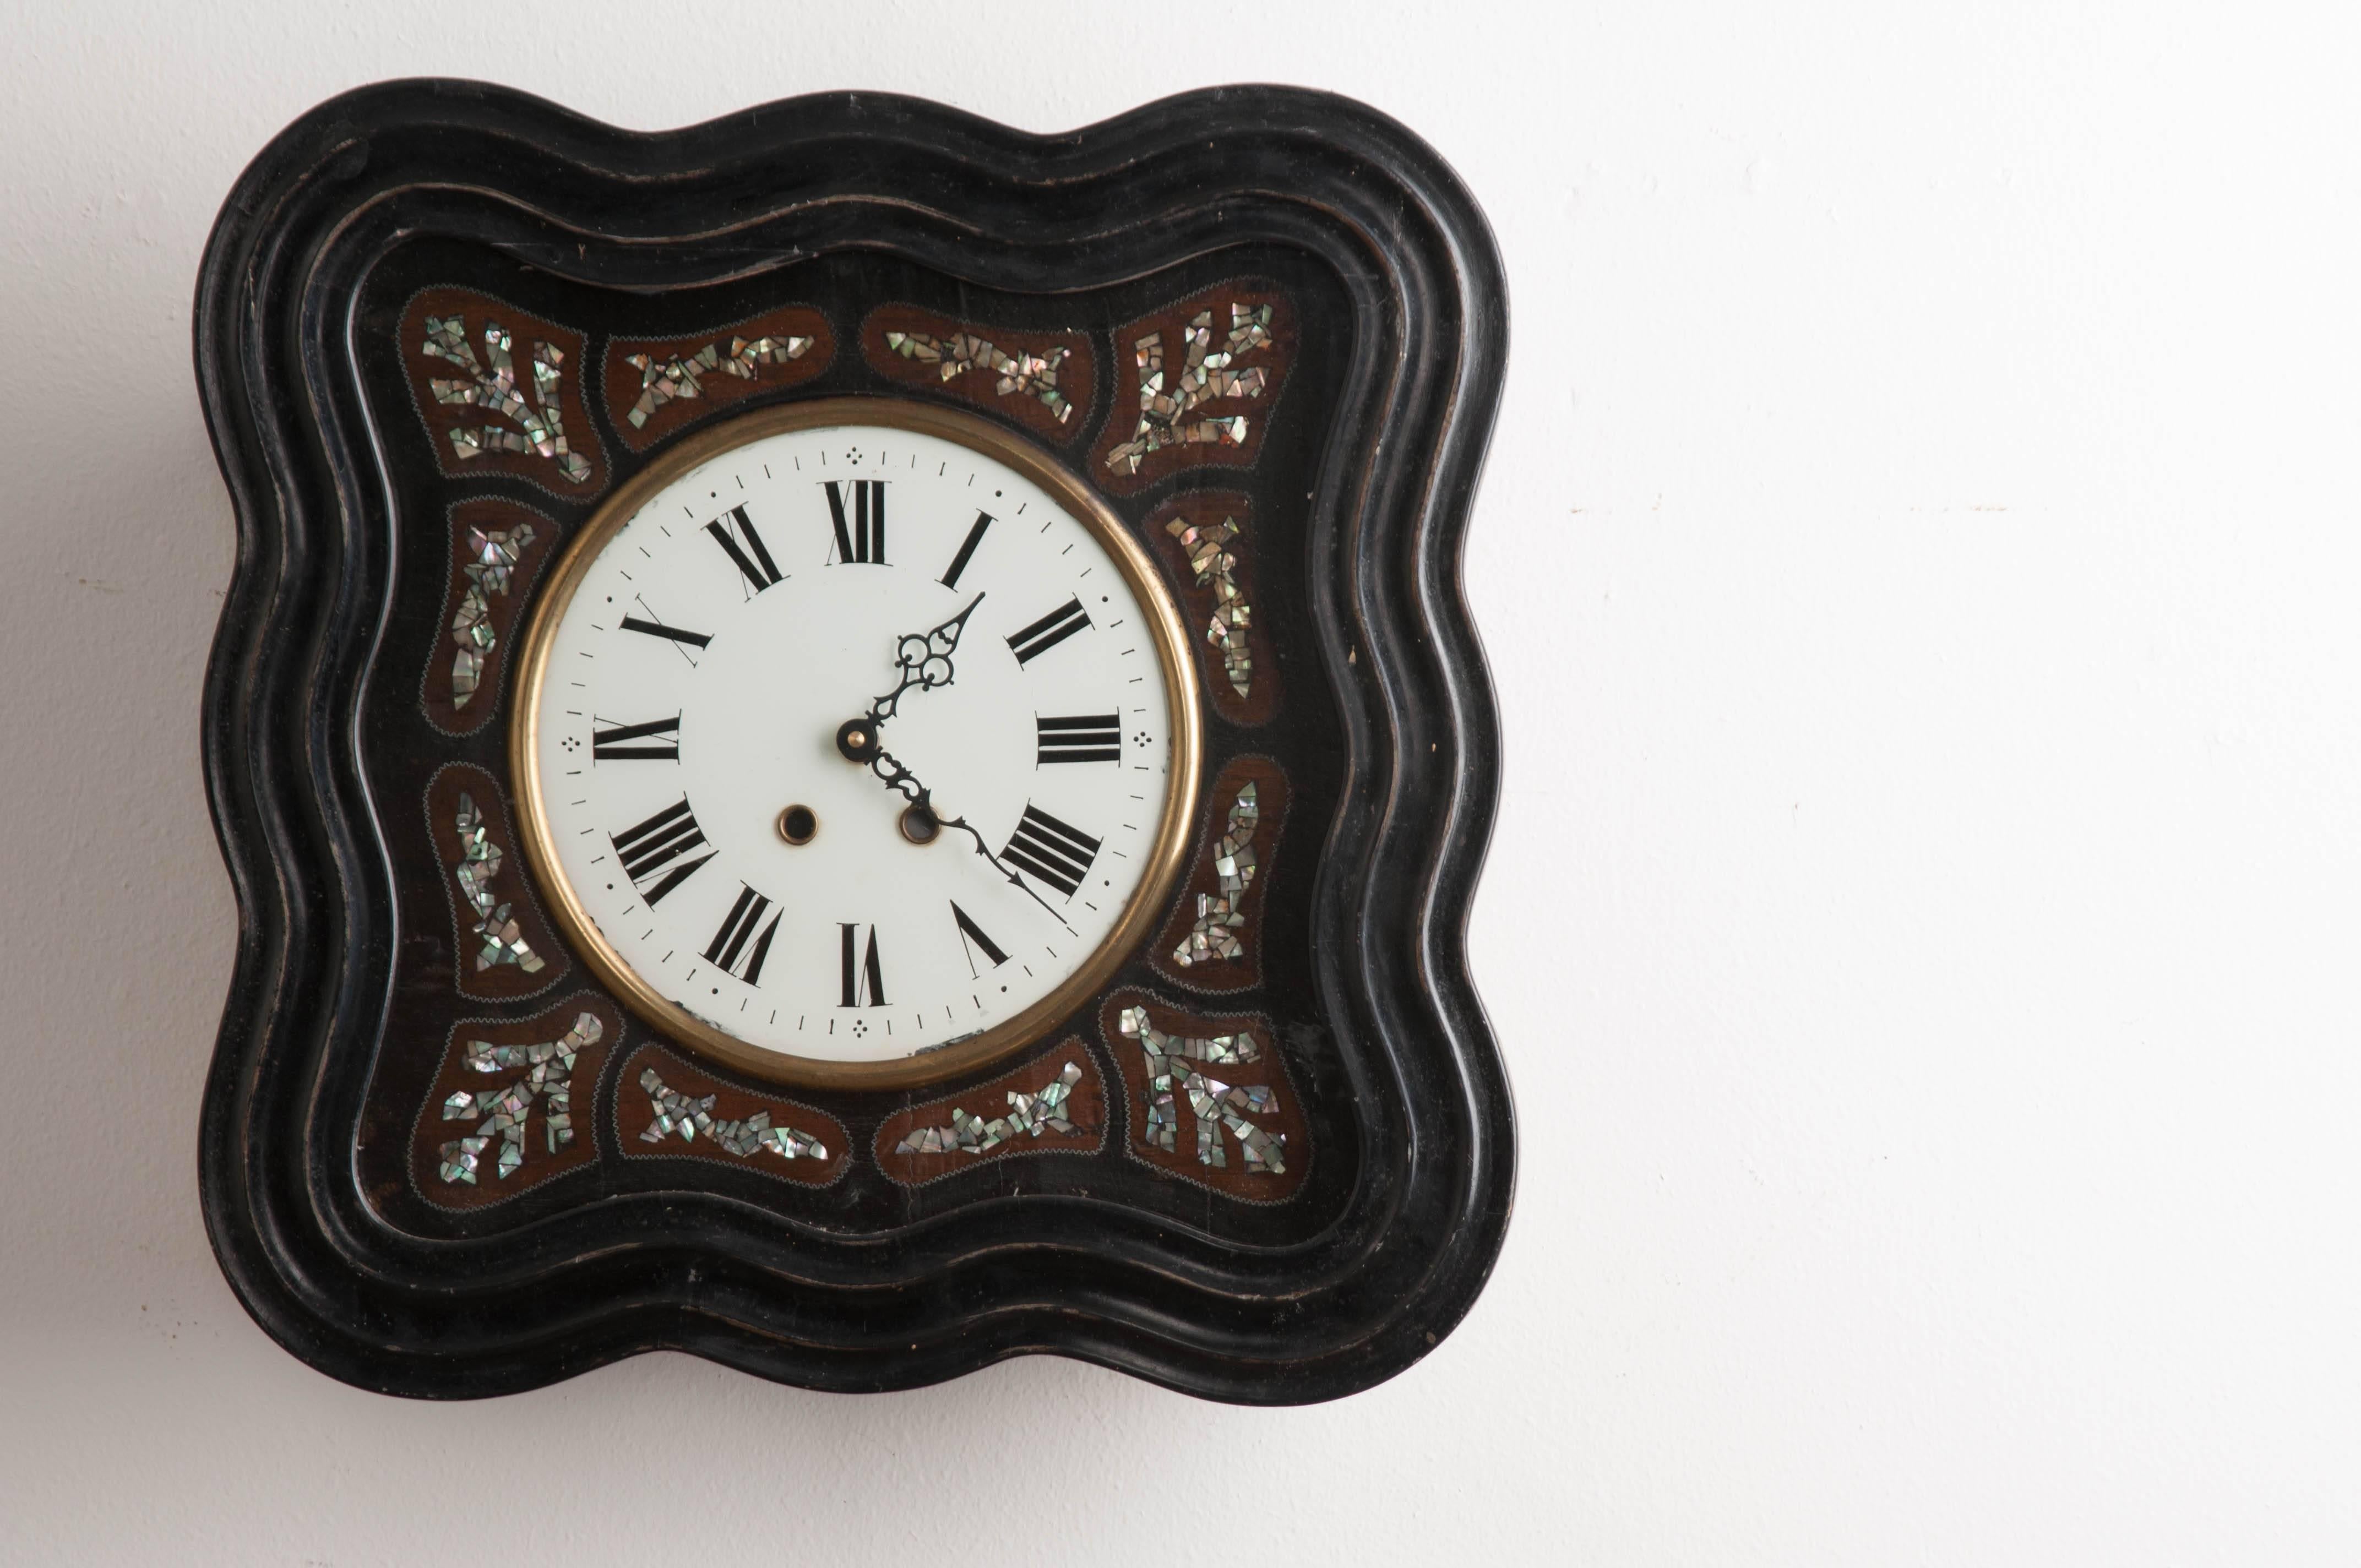 A Napoleon III style wall clock, with exceptional mother-of-pearl inlay, from 1850s France. This shapely clock is square in shape, with a wonderfully wavy frame. This frame is hand-carved and ebonized. It closes before a hand-painted clock face,